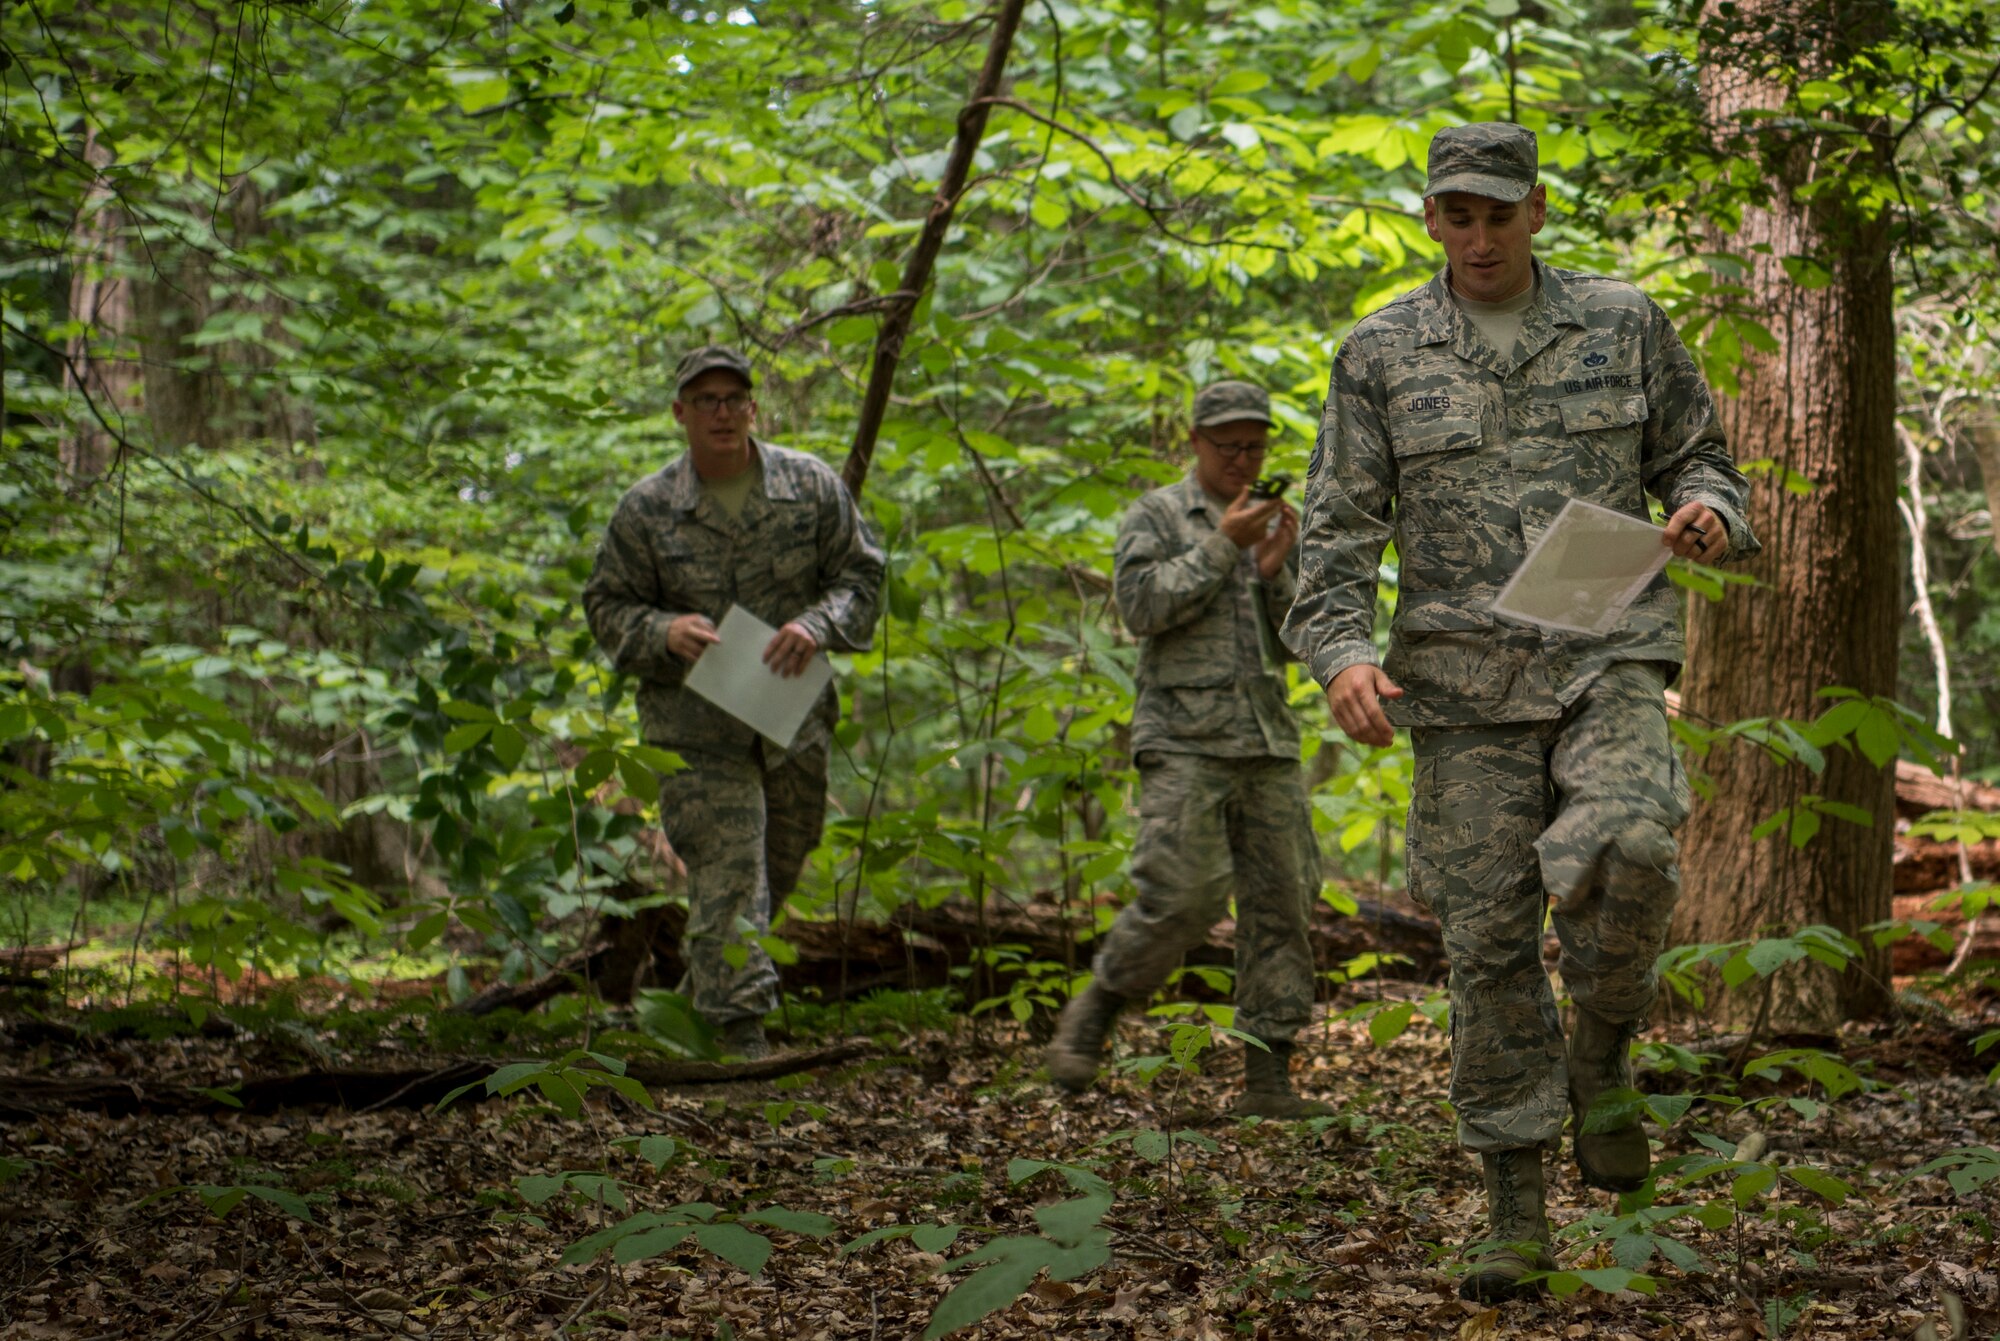 U.S. Air Force Airmen assigned to the 633rd Civil Engineer Squadron practice land navigation during Prime Base Engineer Emergency Force training at Joint Base Langley-Eustis, Virginia, July 19, 2018.